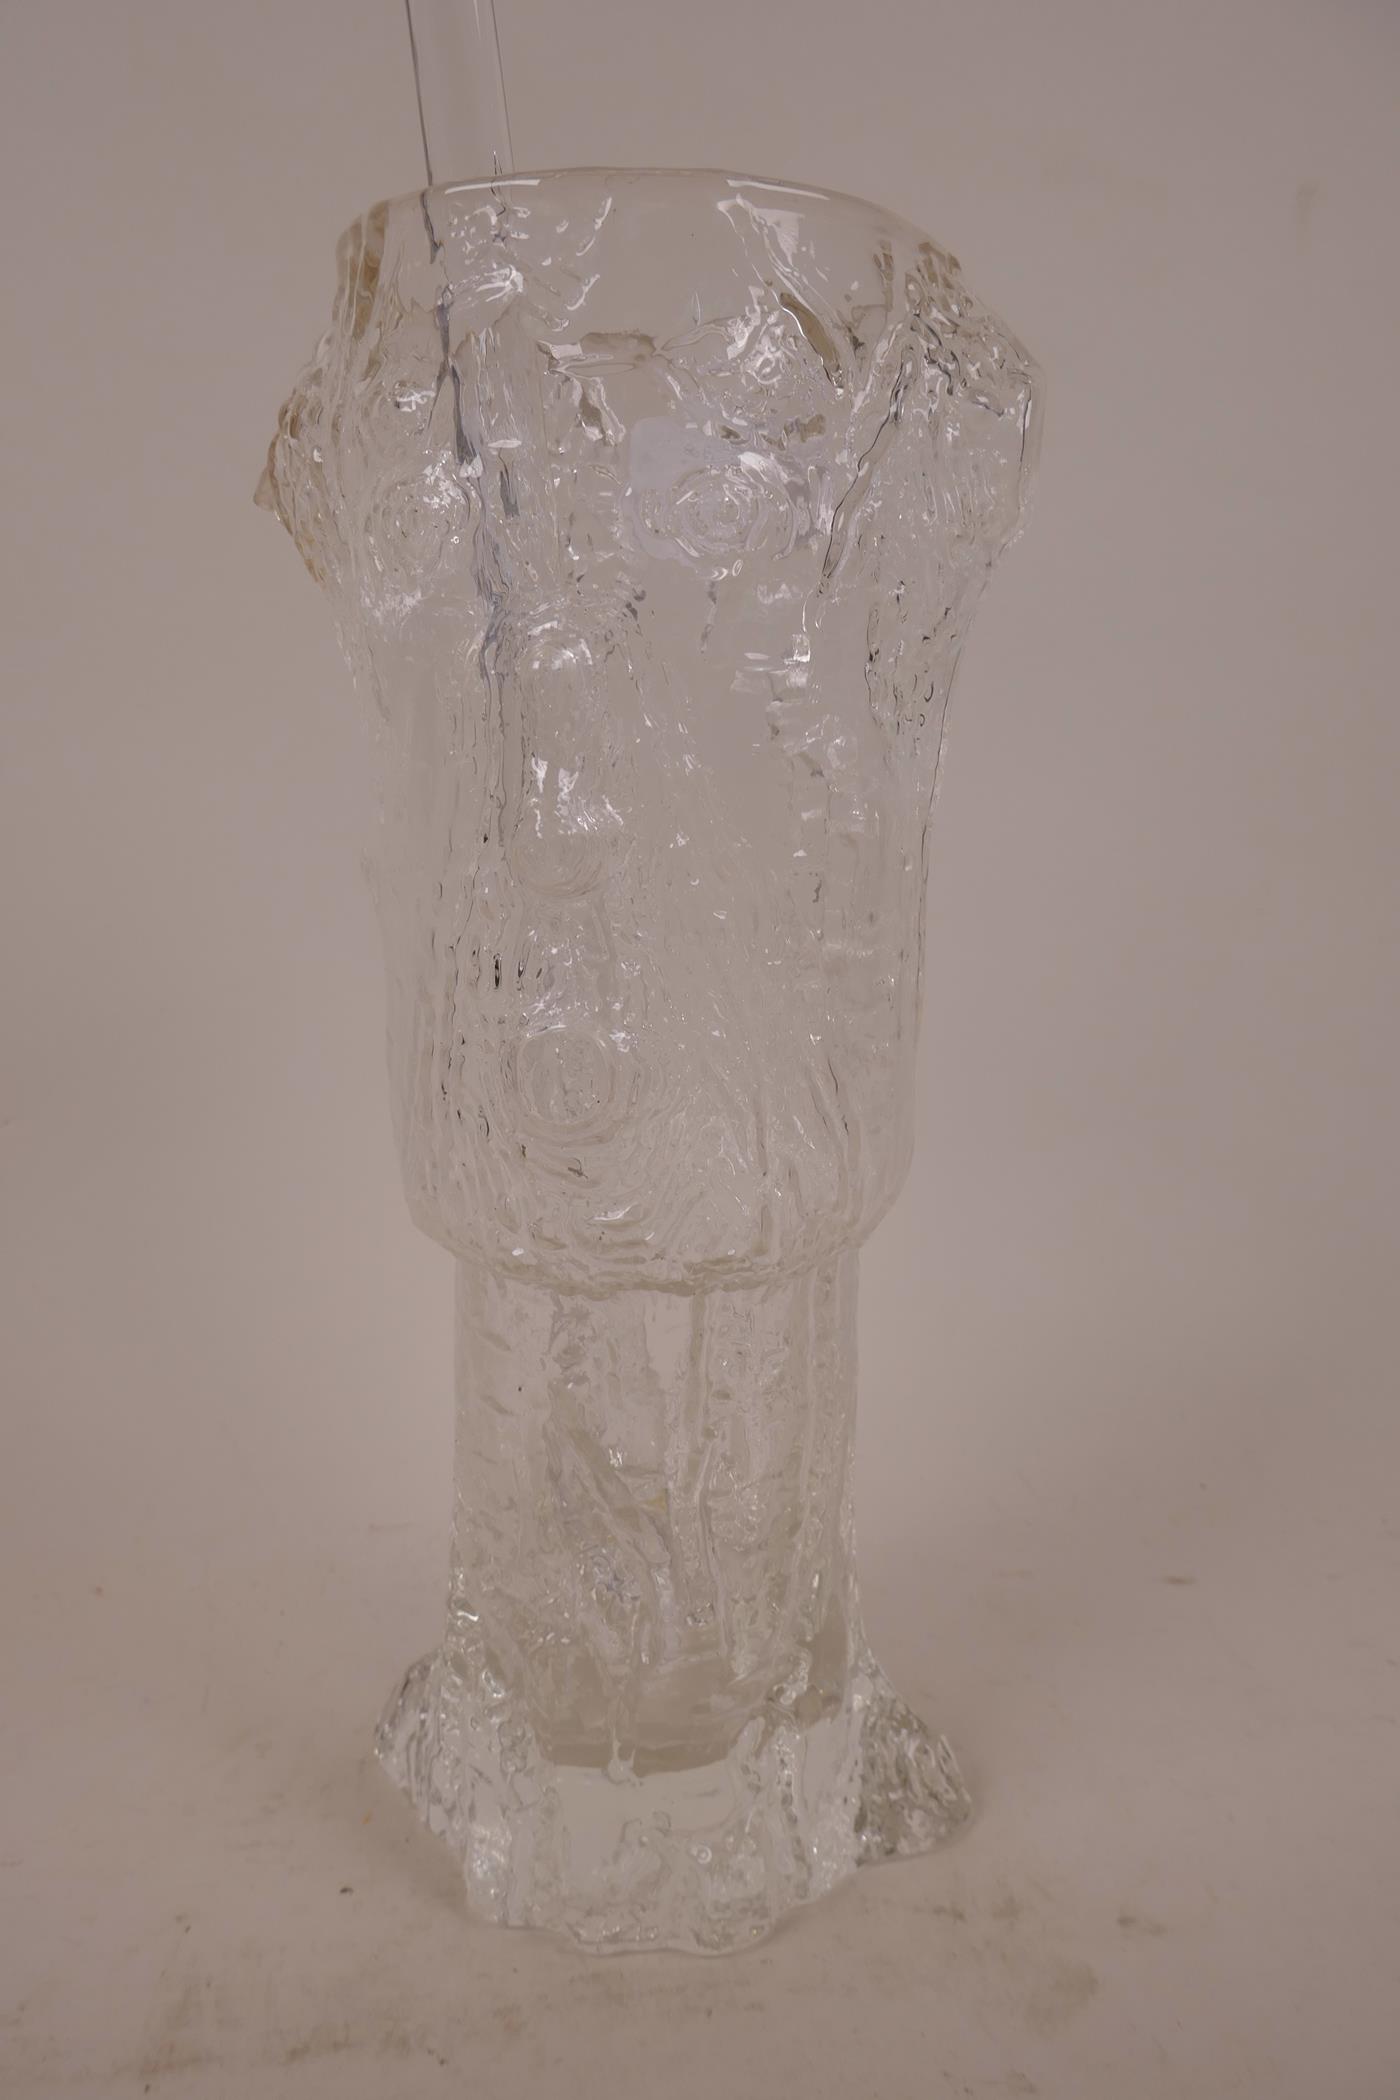 A signed studio glass tree bark and face pattern Pimms jug, with horse's hoof stirer, 10" high - Image 2 of 3